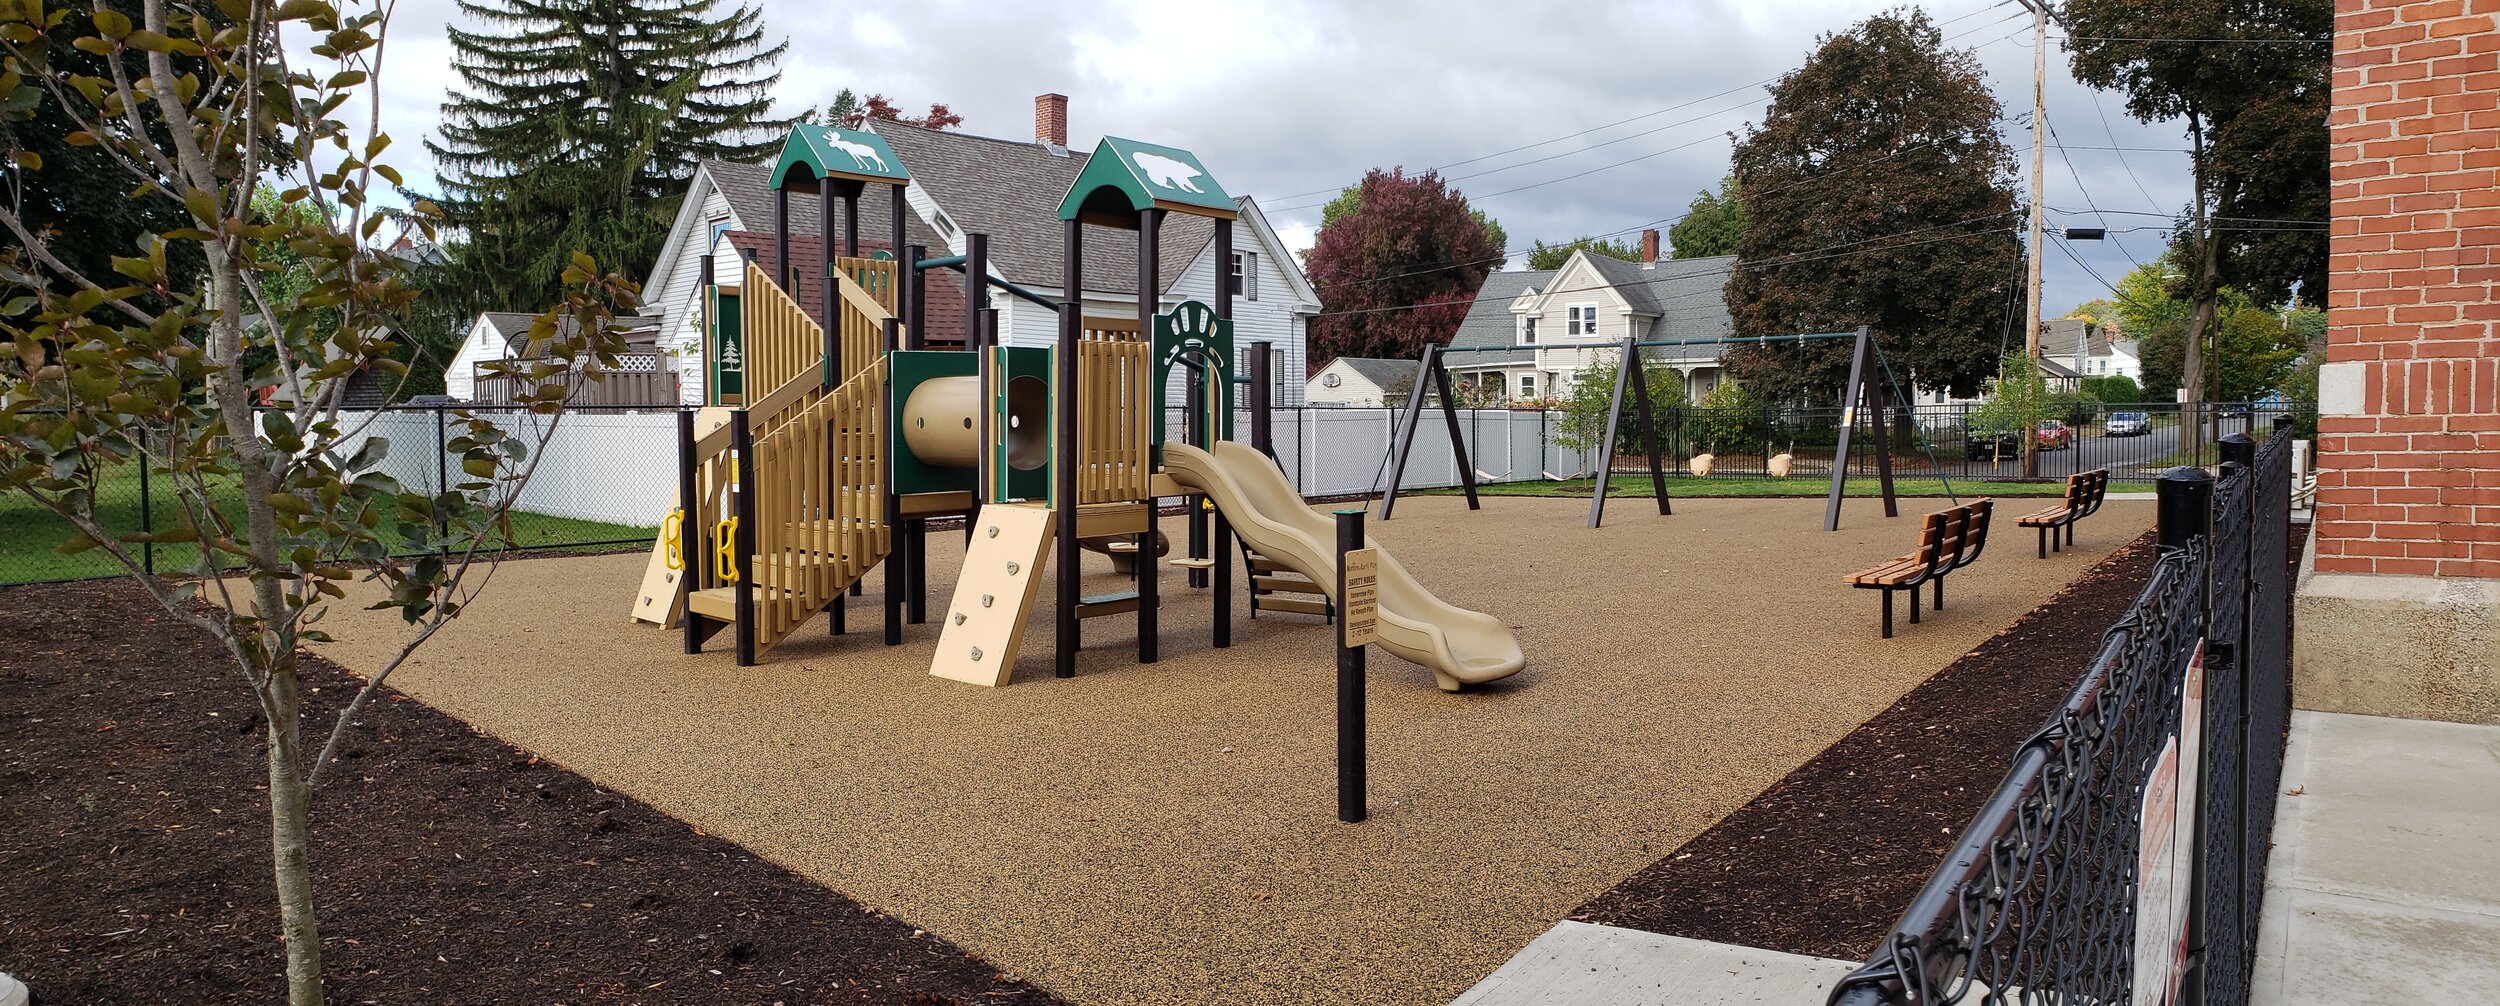 Mosely Street Apartments Playground 3.jpg